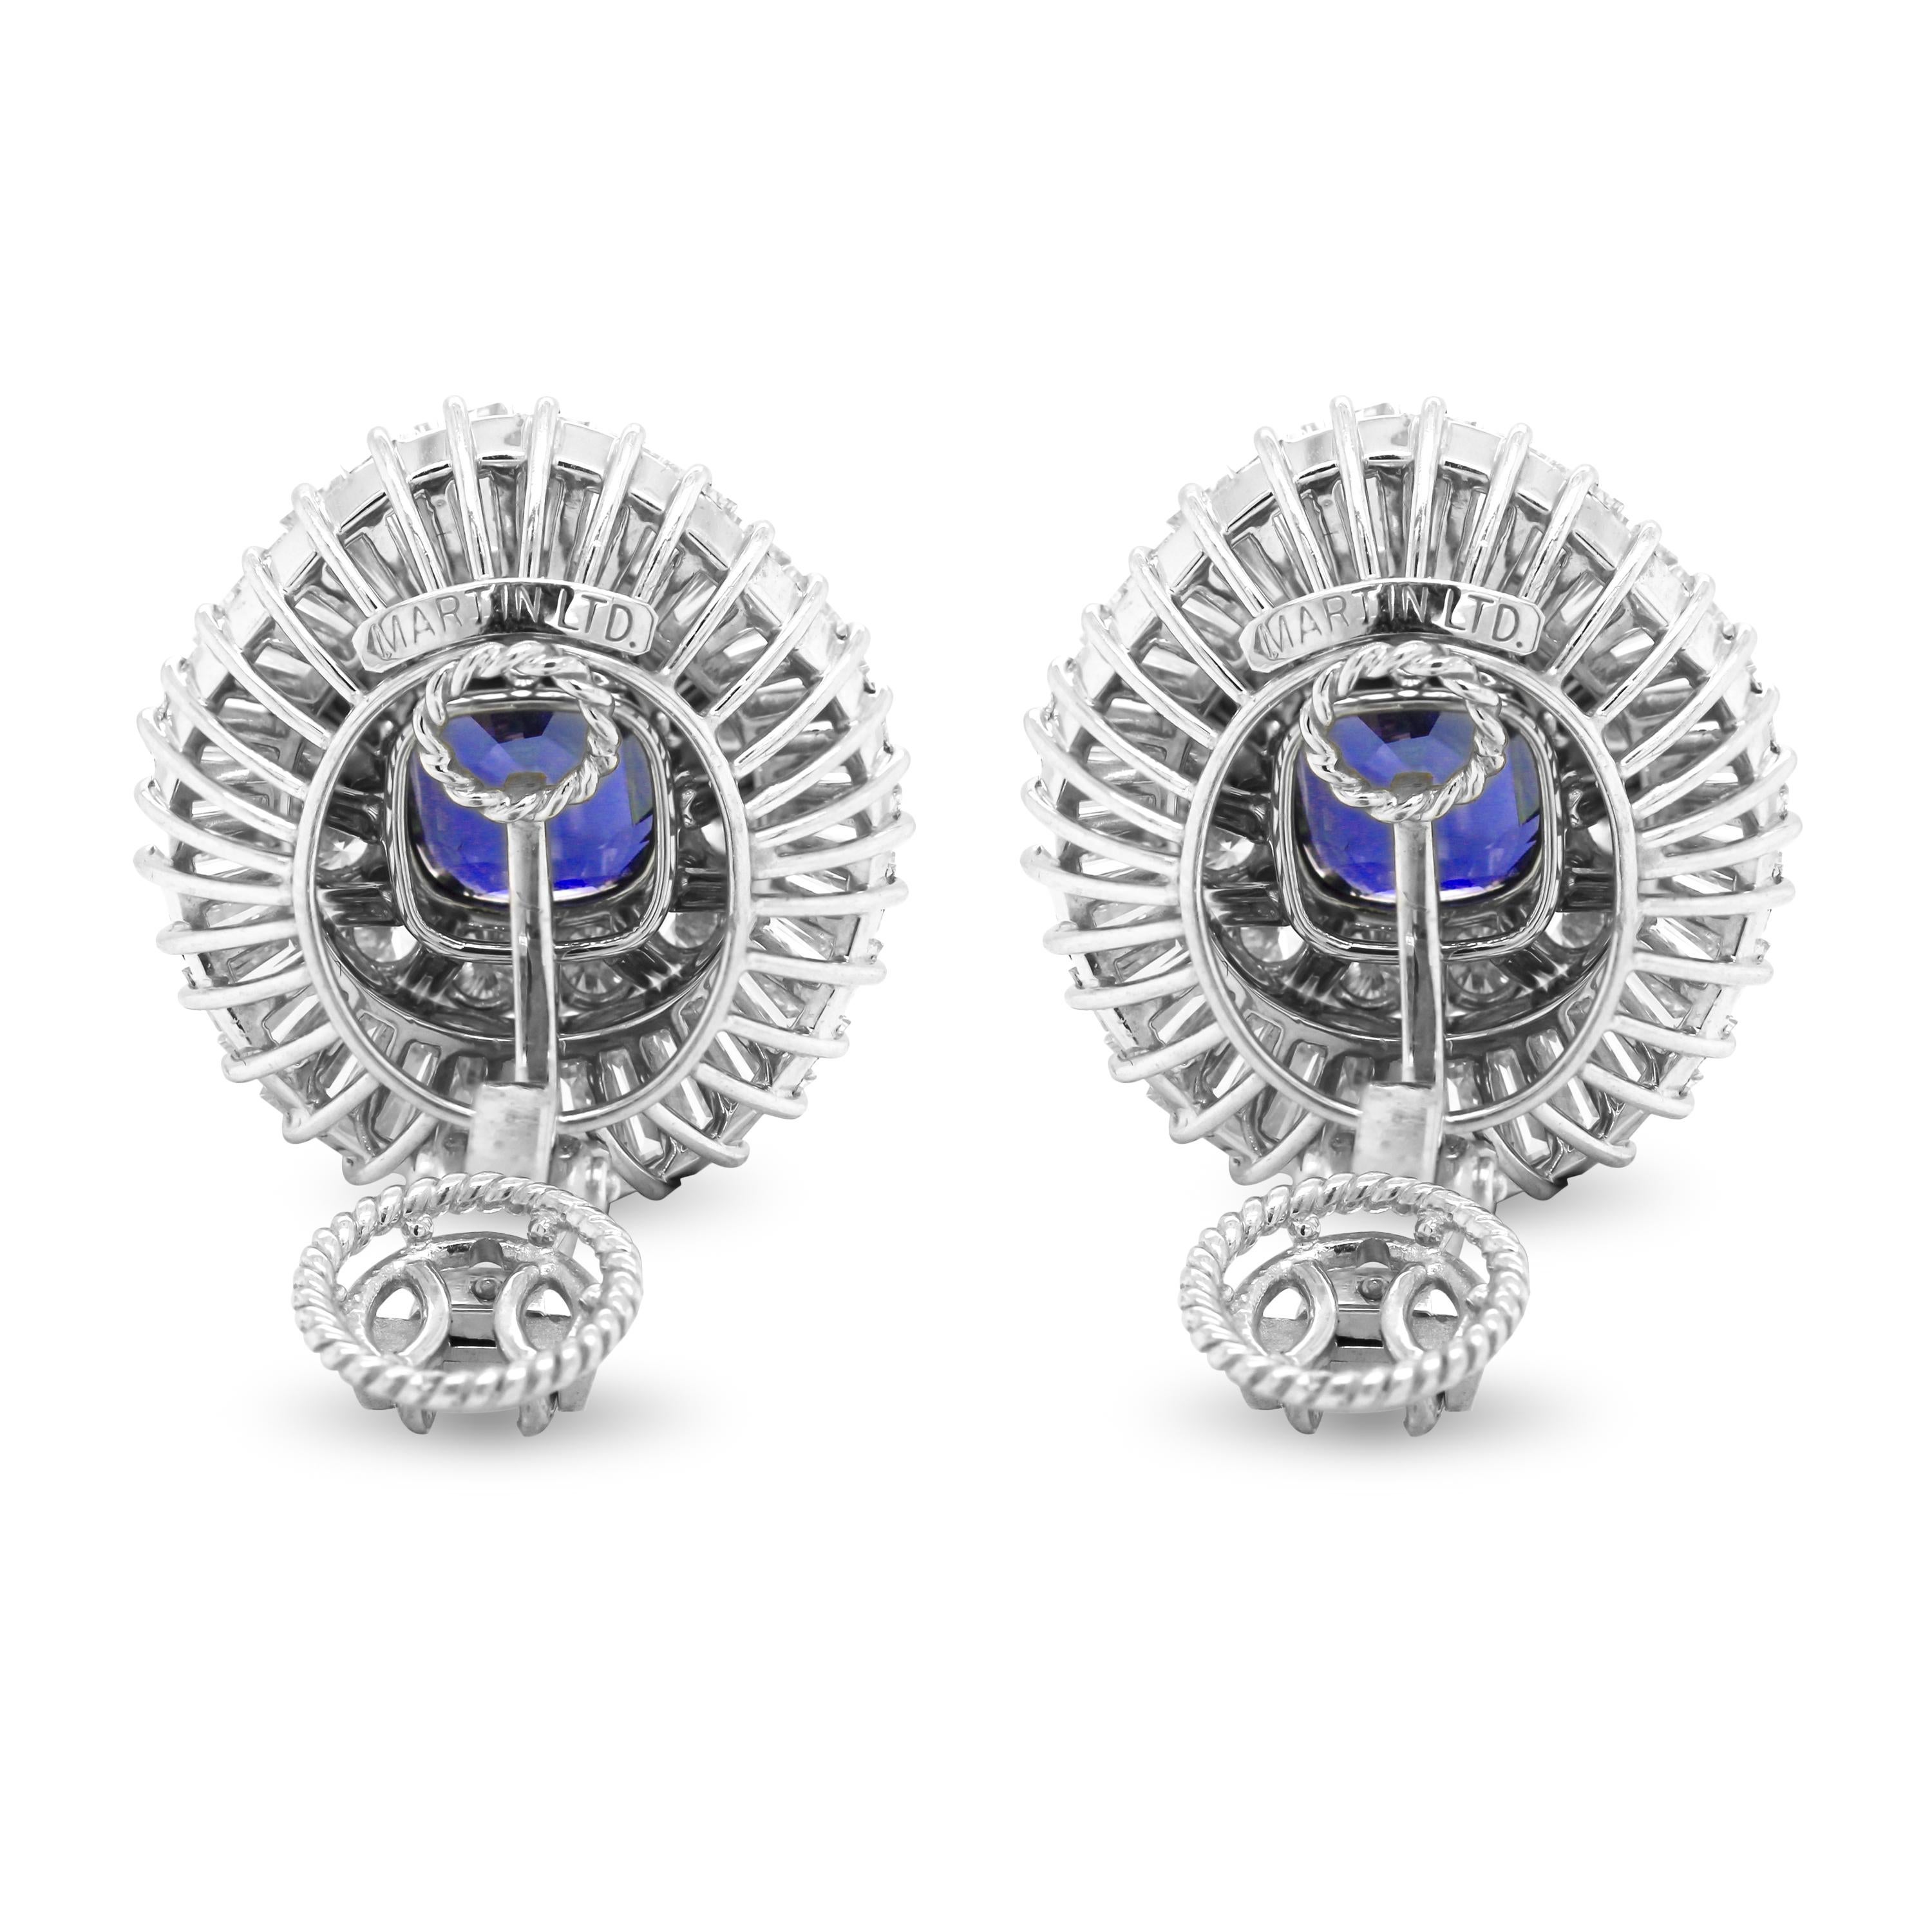 Ceylon Cushion Blue Sapphire Tapered Baguette Round Diamond Platinum Earrings

These state-of-the-art earrings feature two, cushion-cut, Ceylon Blue Sapphires with Tapered Baguette and round diamonds all throughout.

Apprx. 9 carat Ceylon Blue